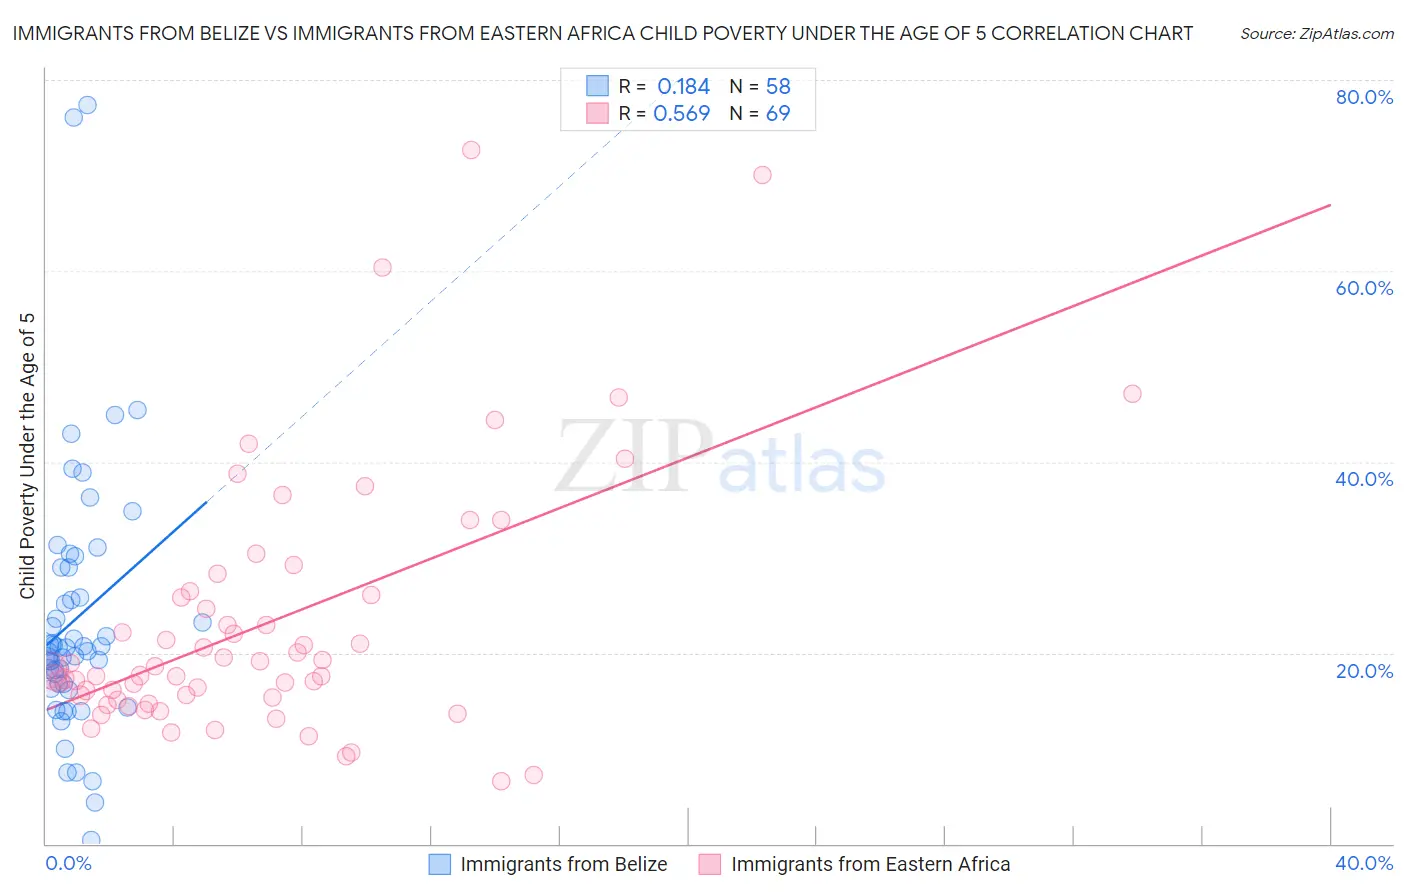 Immigrants from Belize vs Immigrants from Eastern Africa Child Poverty Under the Age of 5